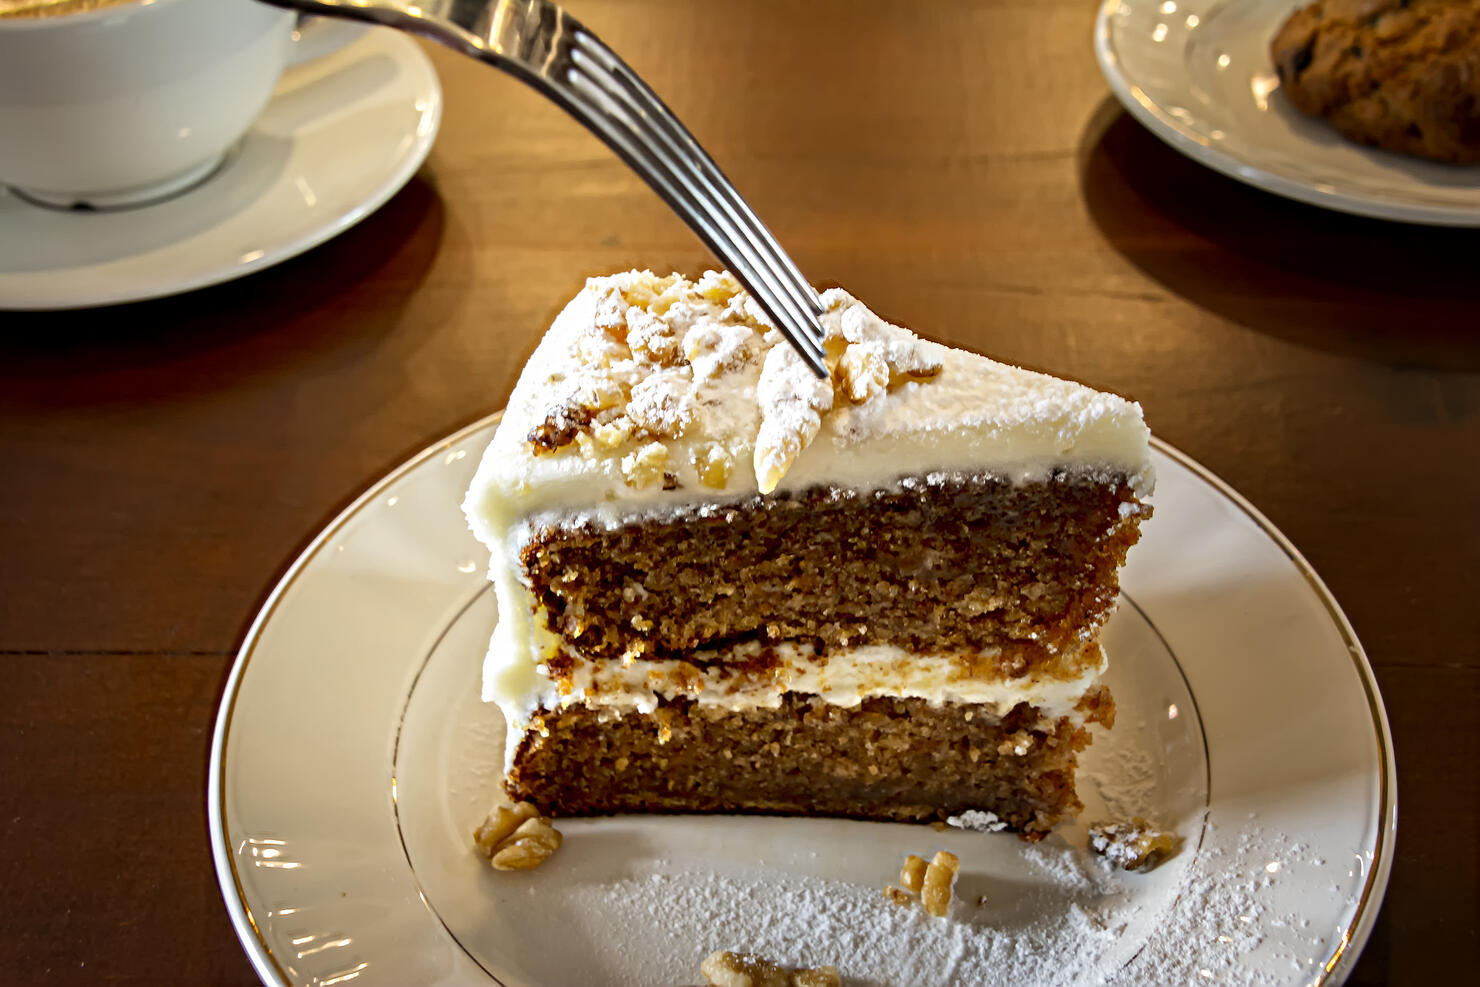 Delicious carrot cake for snack time.